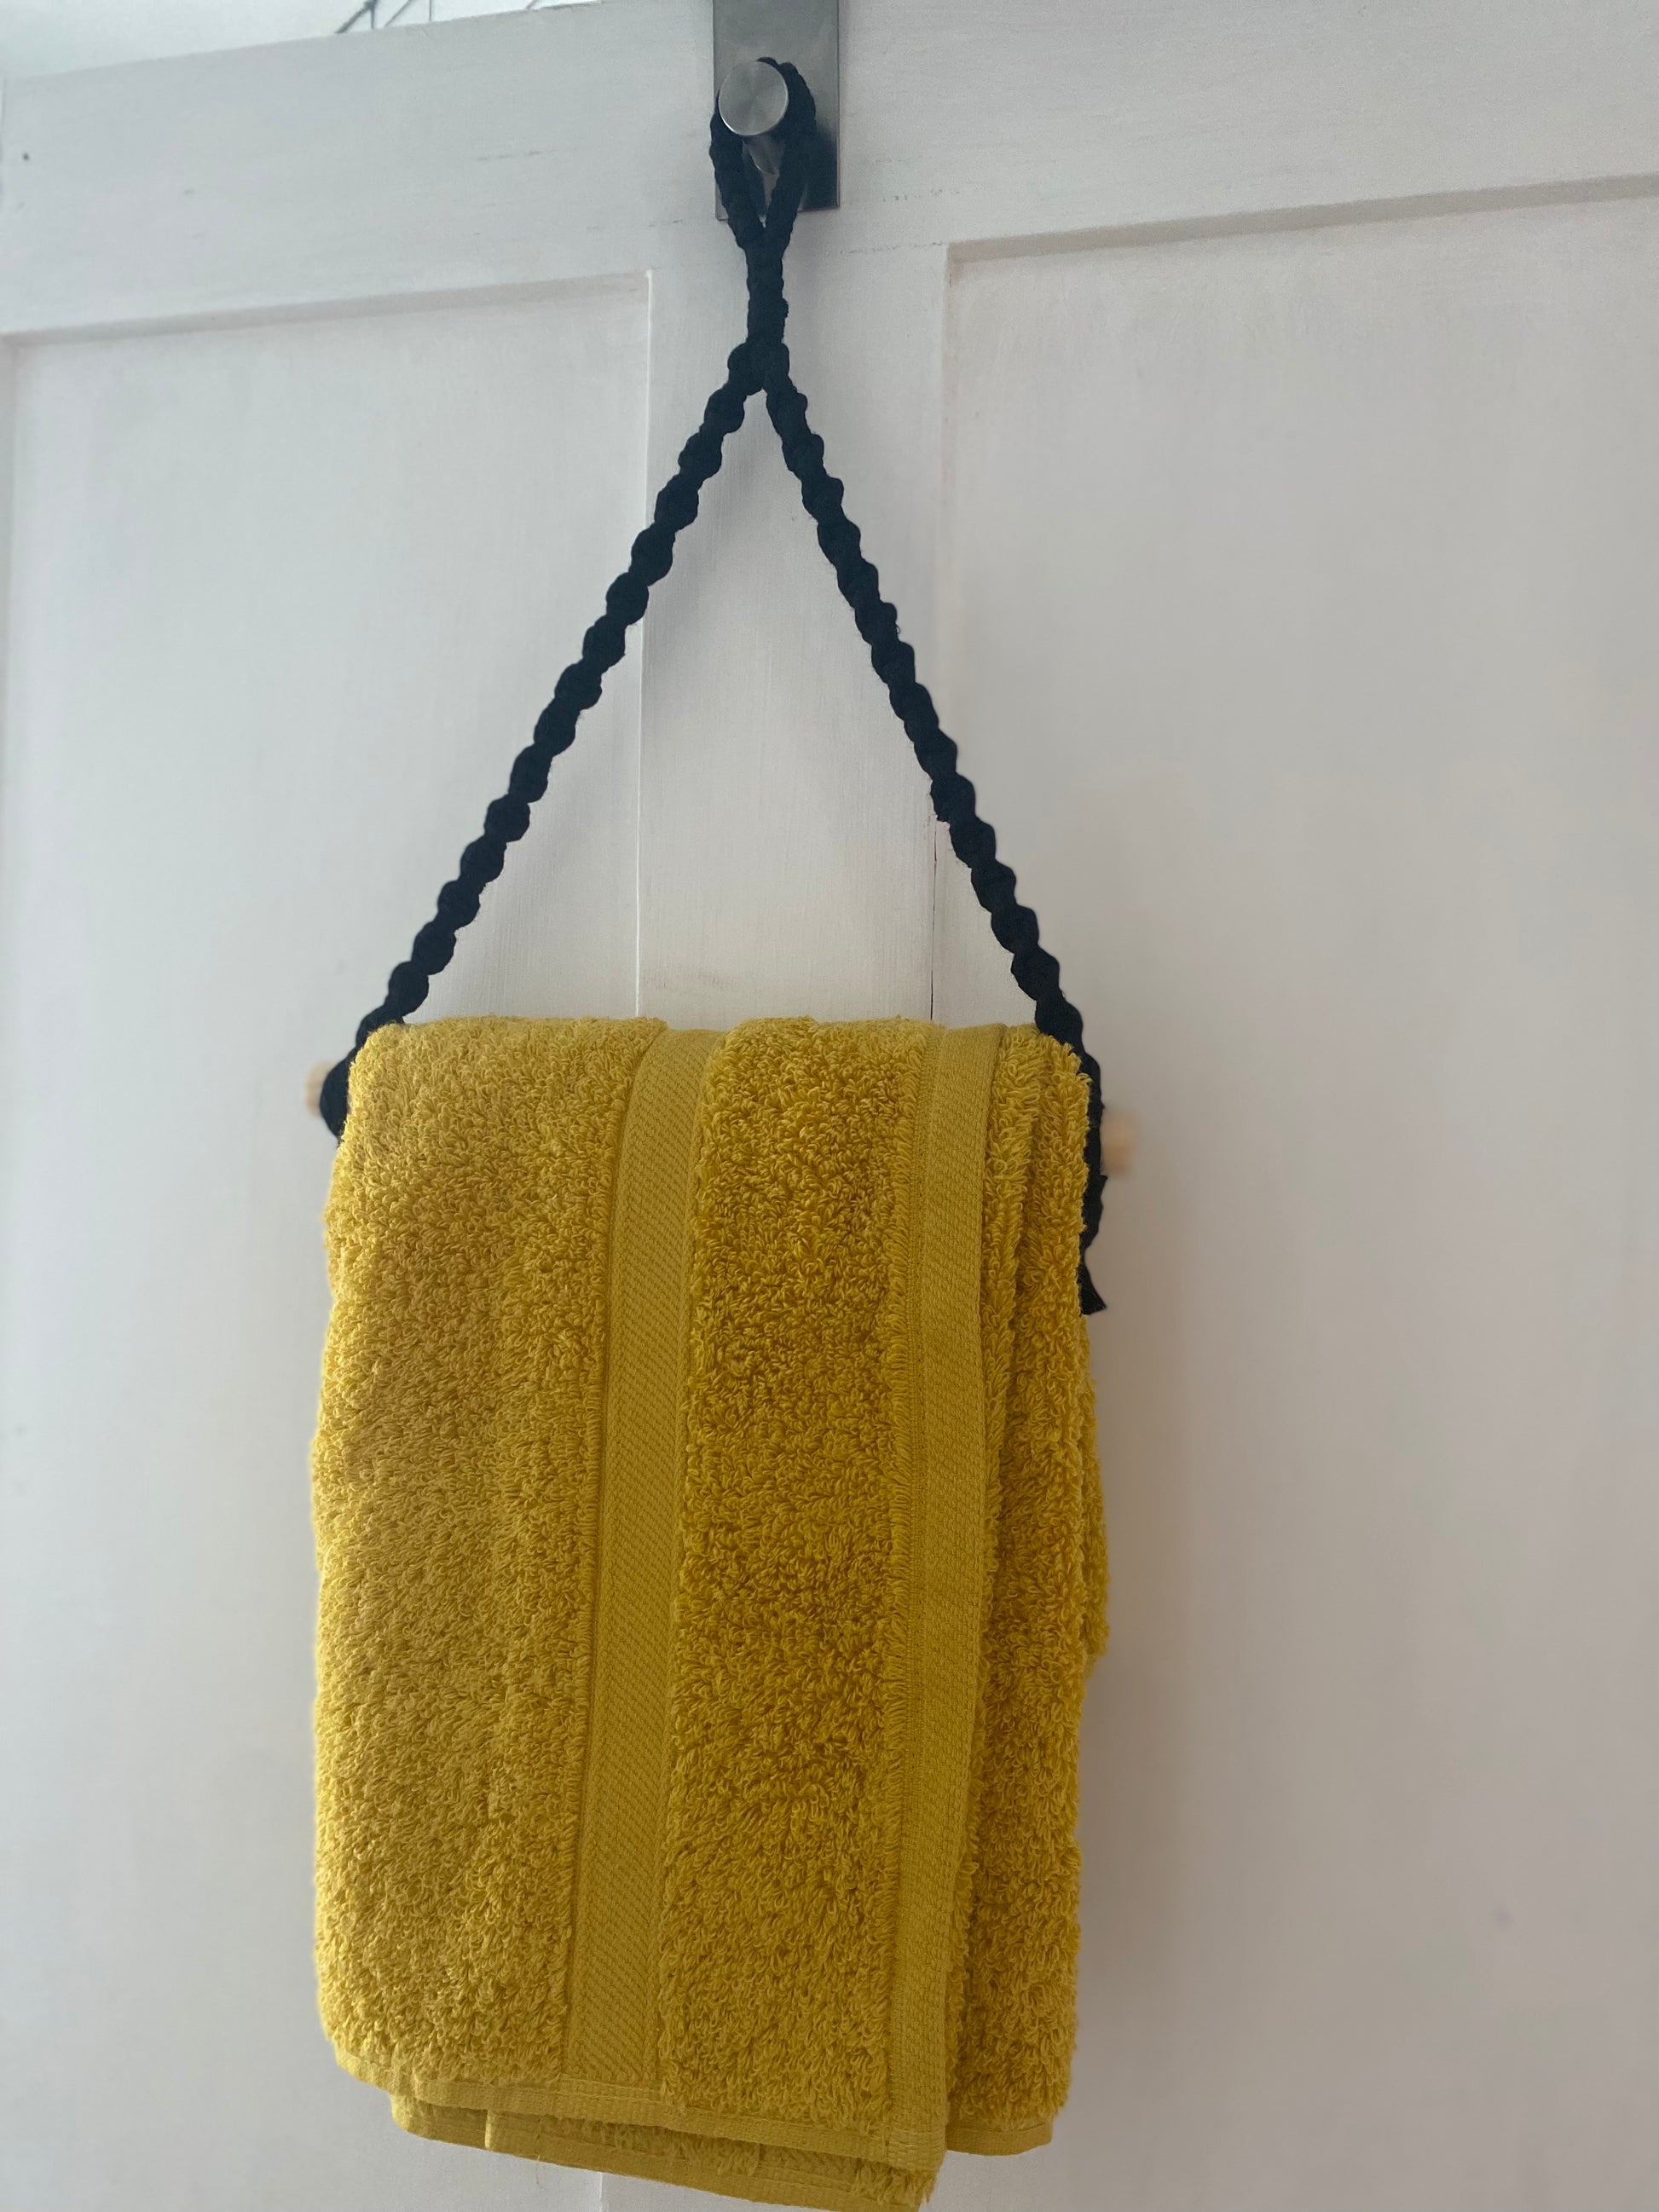 A yellow towel made from sustainable recycled cotton is hanging on a white wooden door by a black braided cord and wooden rod from the Hand towel holder by Macra-Made-With-Love. The towel is neatly folded, with two vertical stripes along its edge. The simple, white-painted door contrasts with the bright eco-friendly towel.